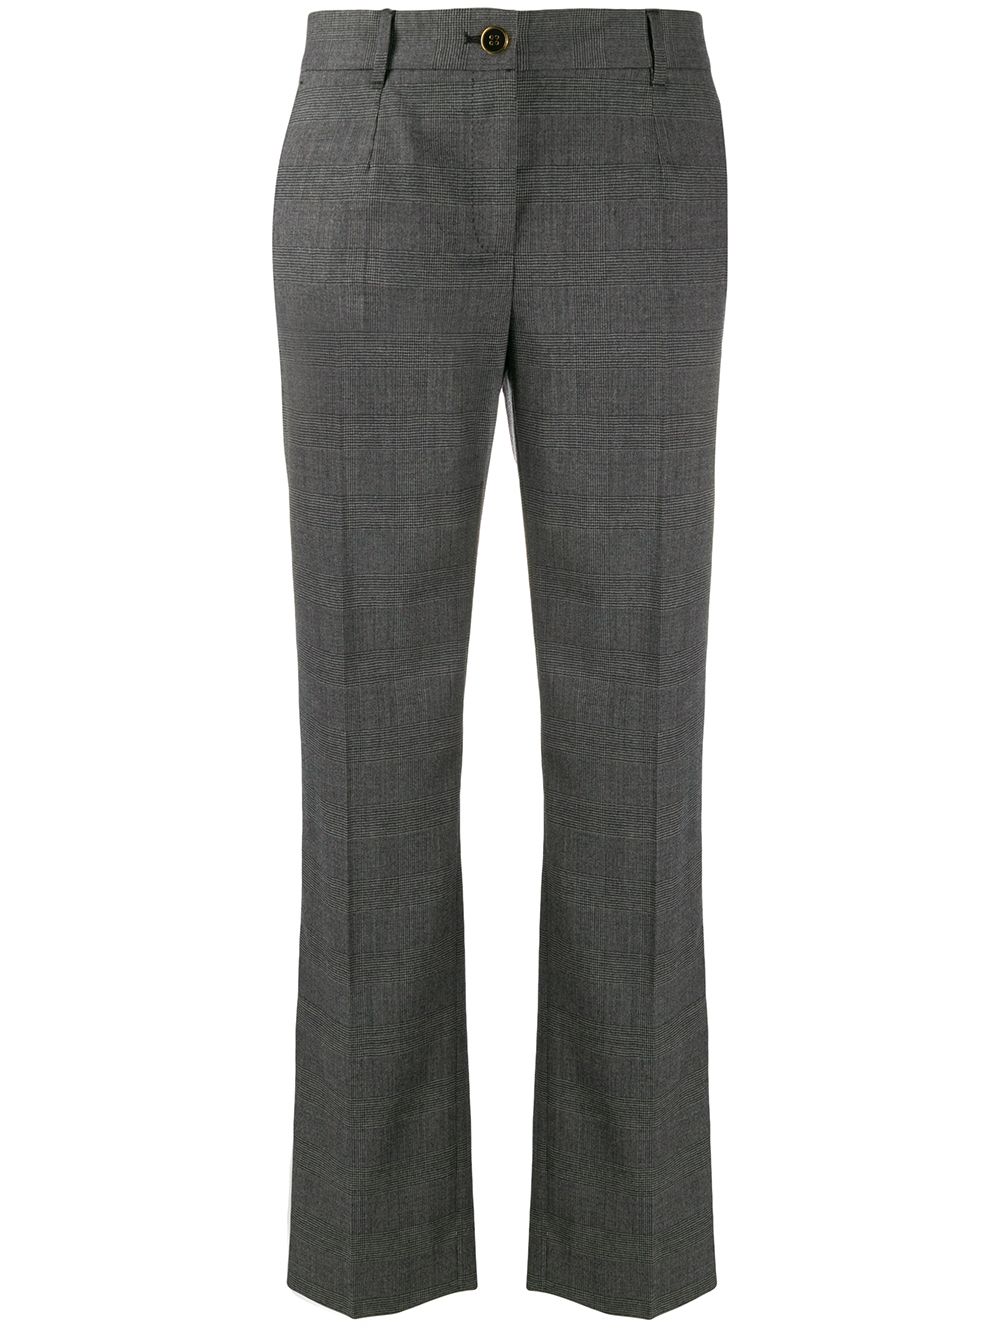 Dolce & Gabbana Houndstooth Trousers